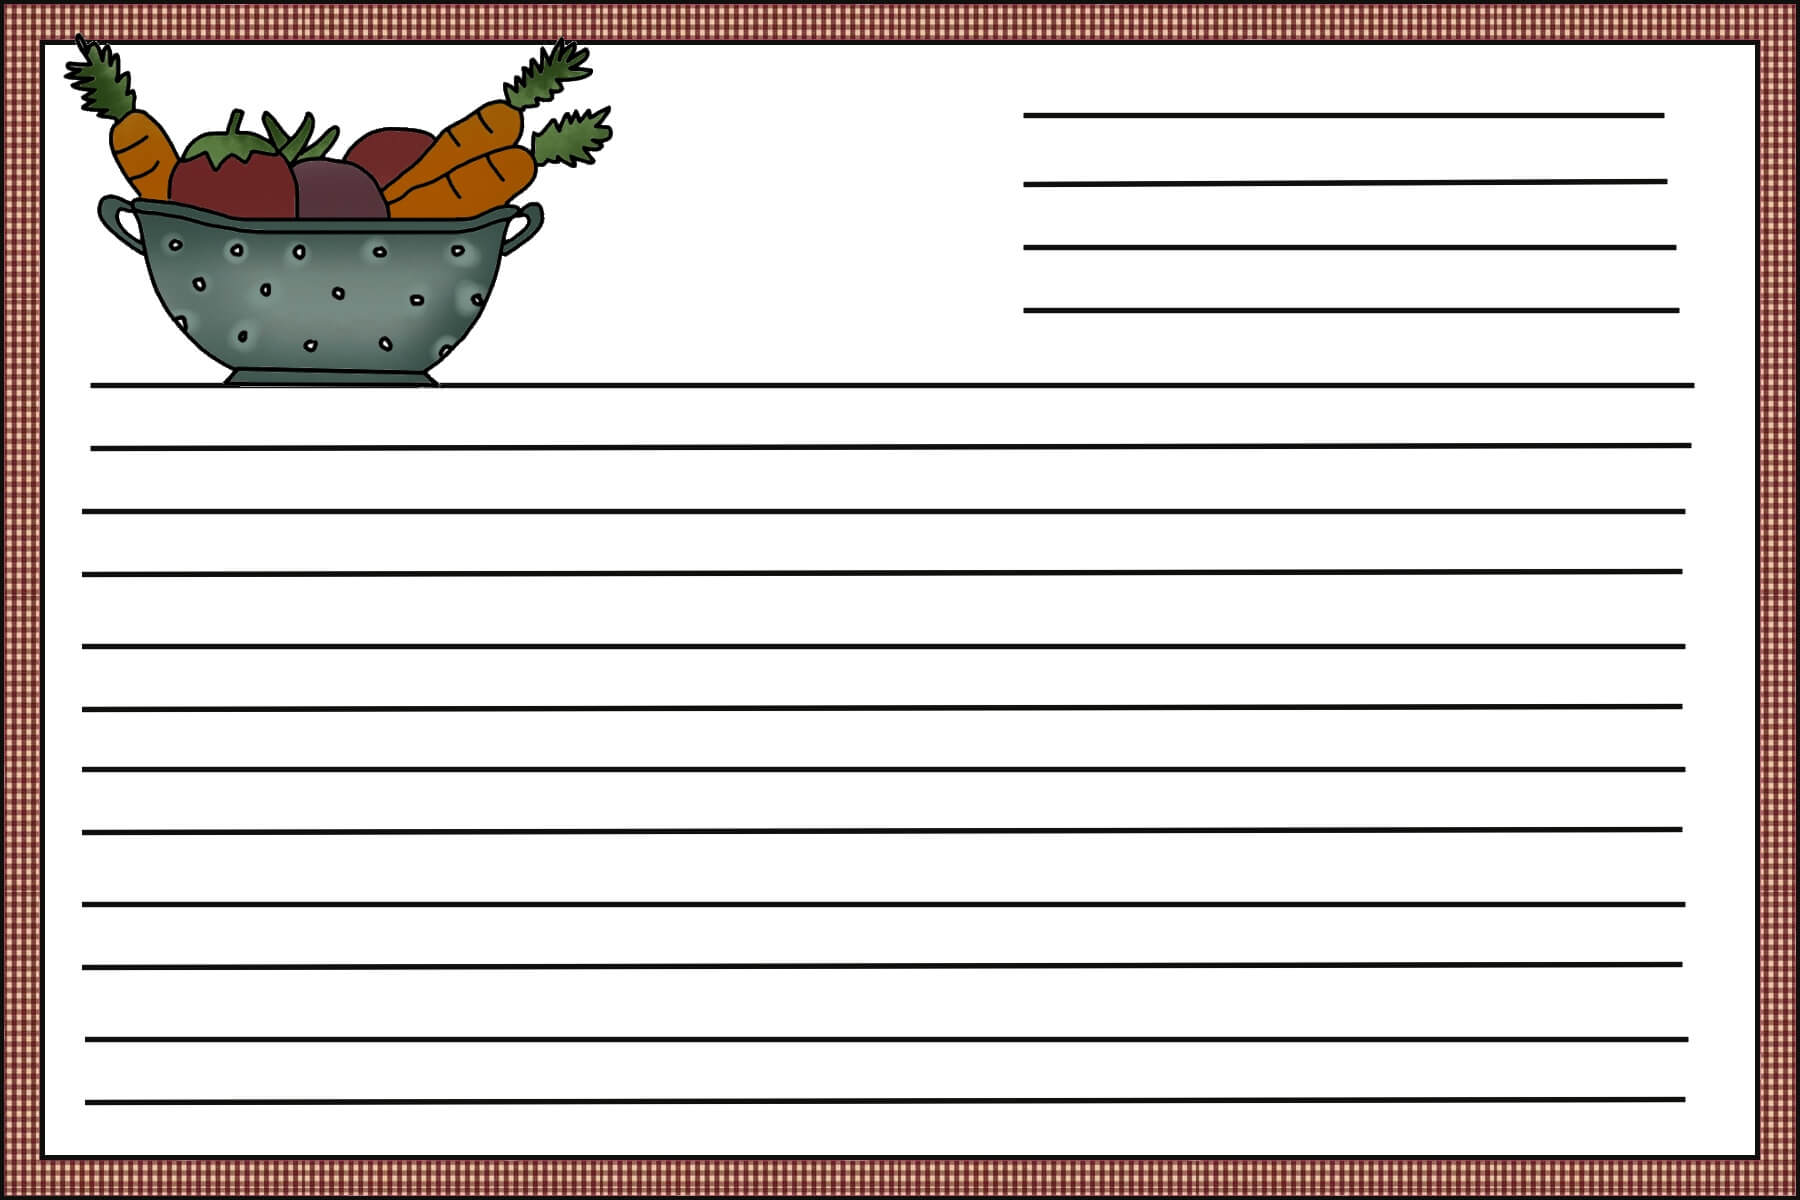 8-free-recipe-card-templates-excel-pdf-formats-here-are-my-within